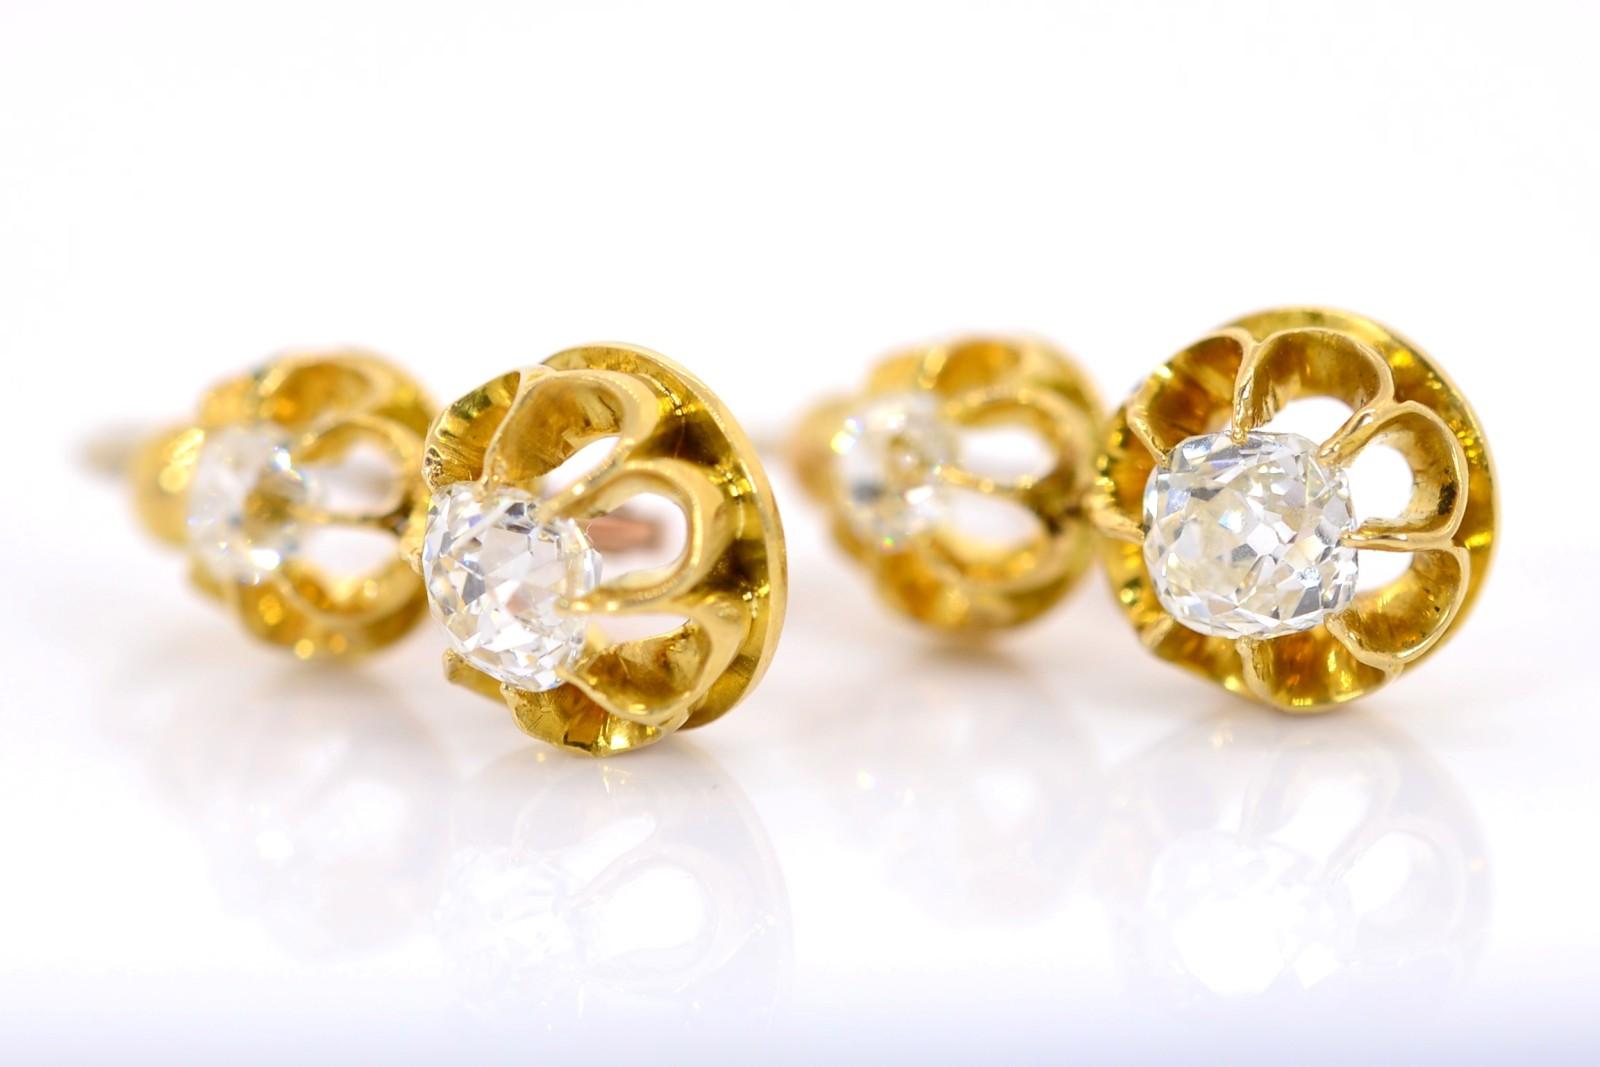 The Victorian-style circa 1950s 18KT yellow gold earrings beautifully flaunt four Old Cushion cut Diamonds.  The shimmering Cushions weigh 1.40 carat and are of sparkling H/I color - VS clarity.   The open claw design baskets showcase the diamonds